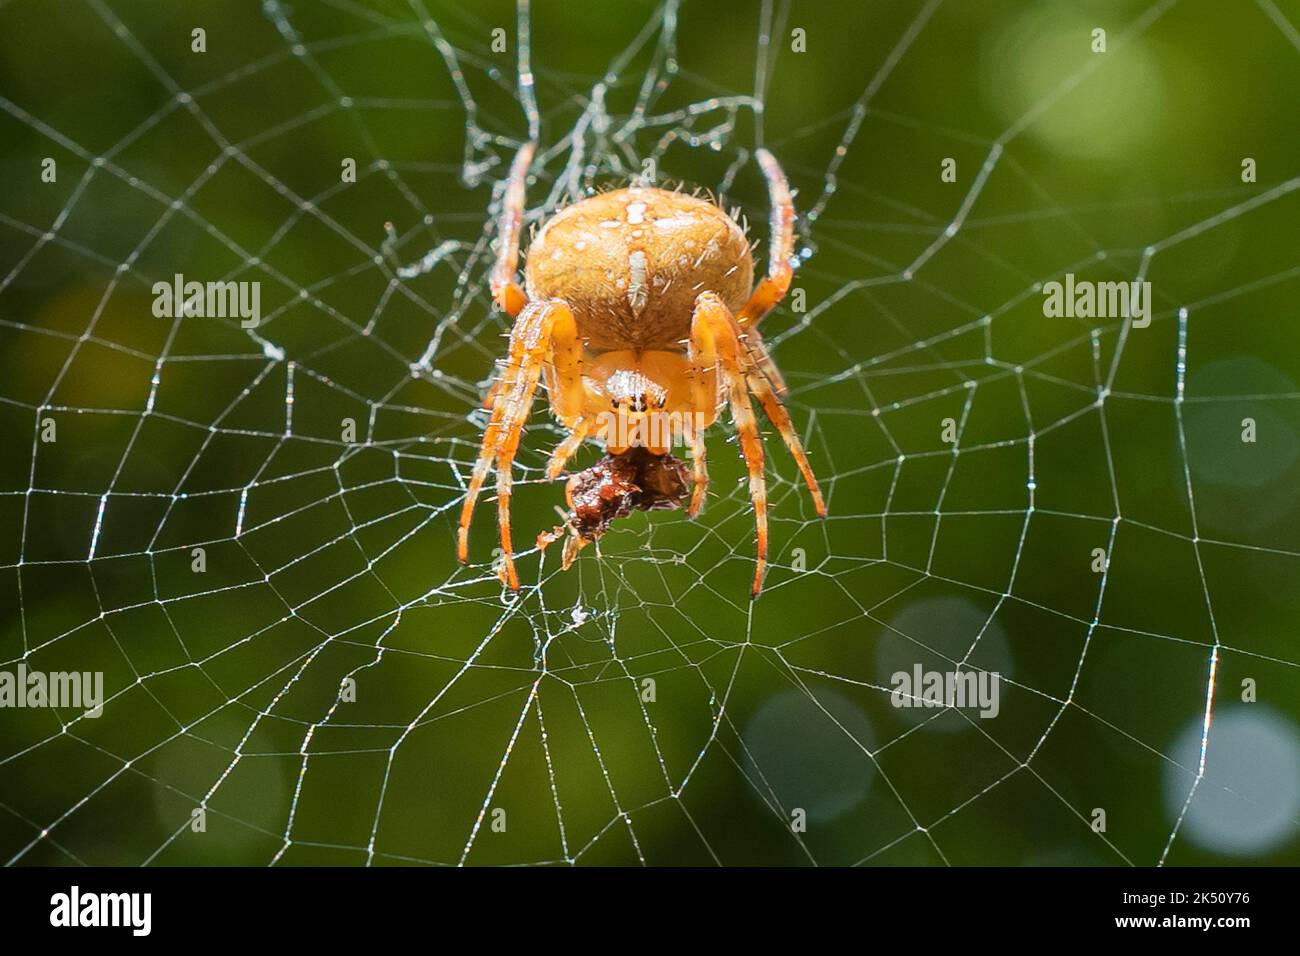 A spider eats a fly trapped in its web Stock Photo